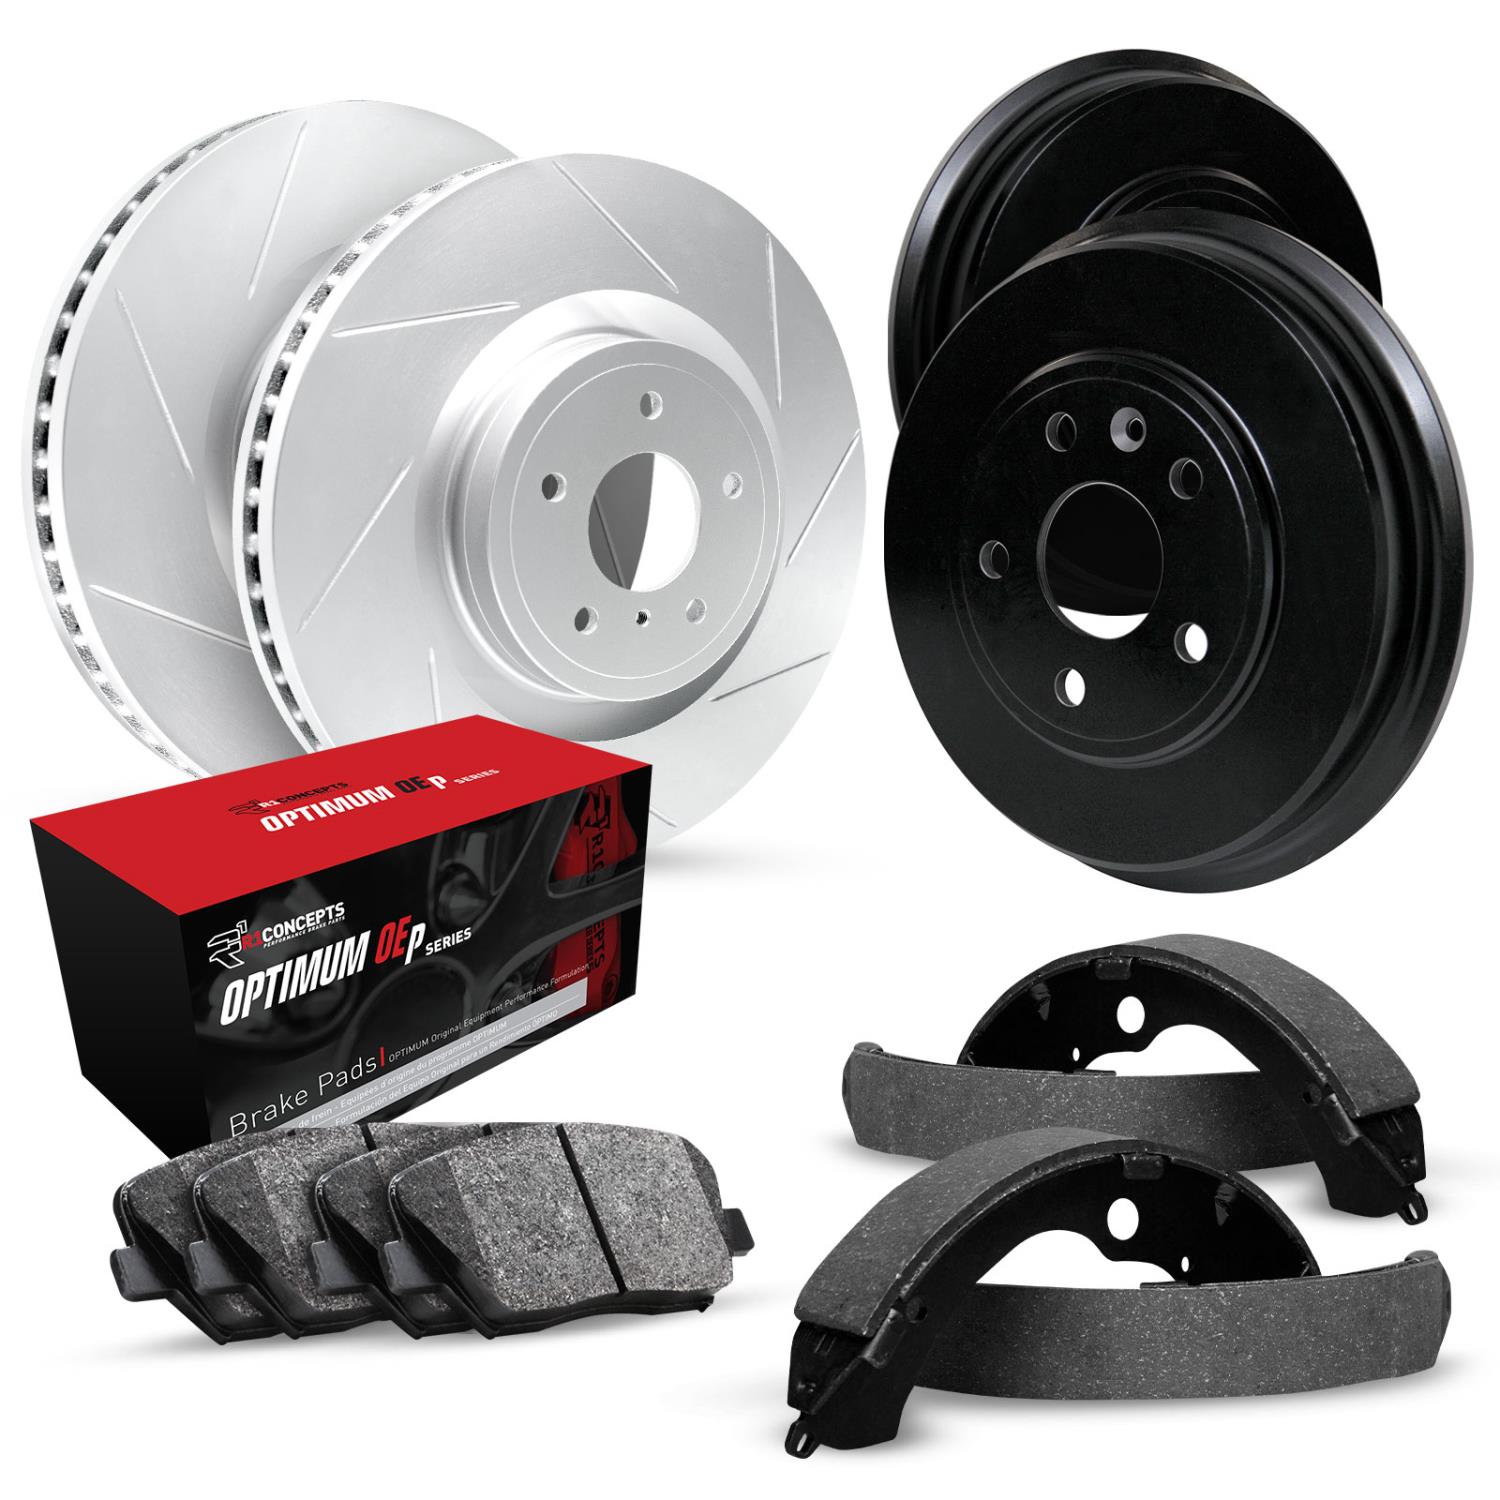 GEO-Carbon Slotted Brake Rotor & Drum Set w/Optimum OE Pads & Shoes, 2005-2015 Lexus/Toyota/Scion, Position: Front & Rear